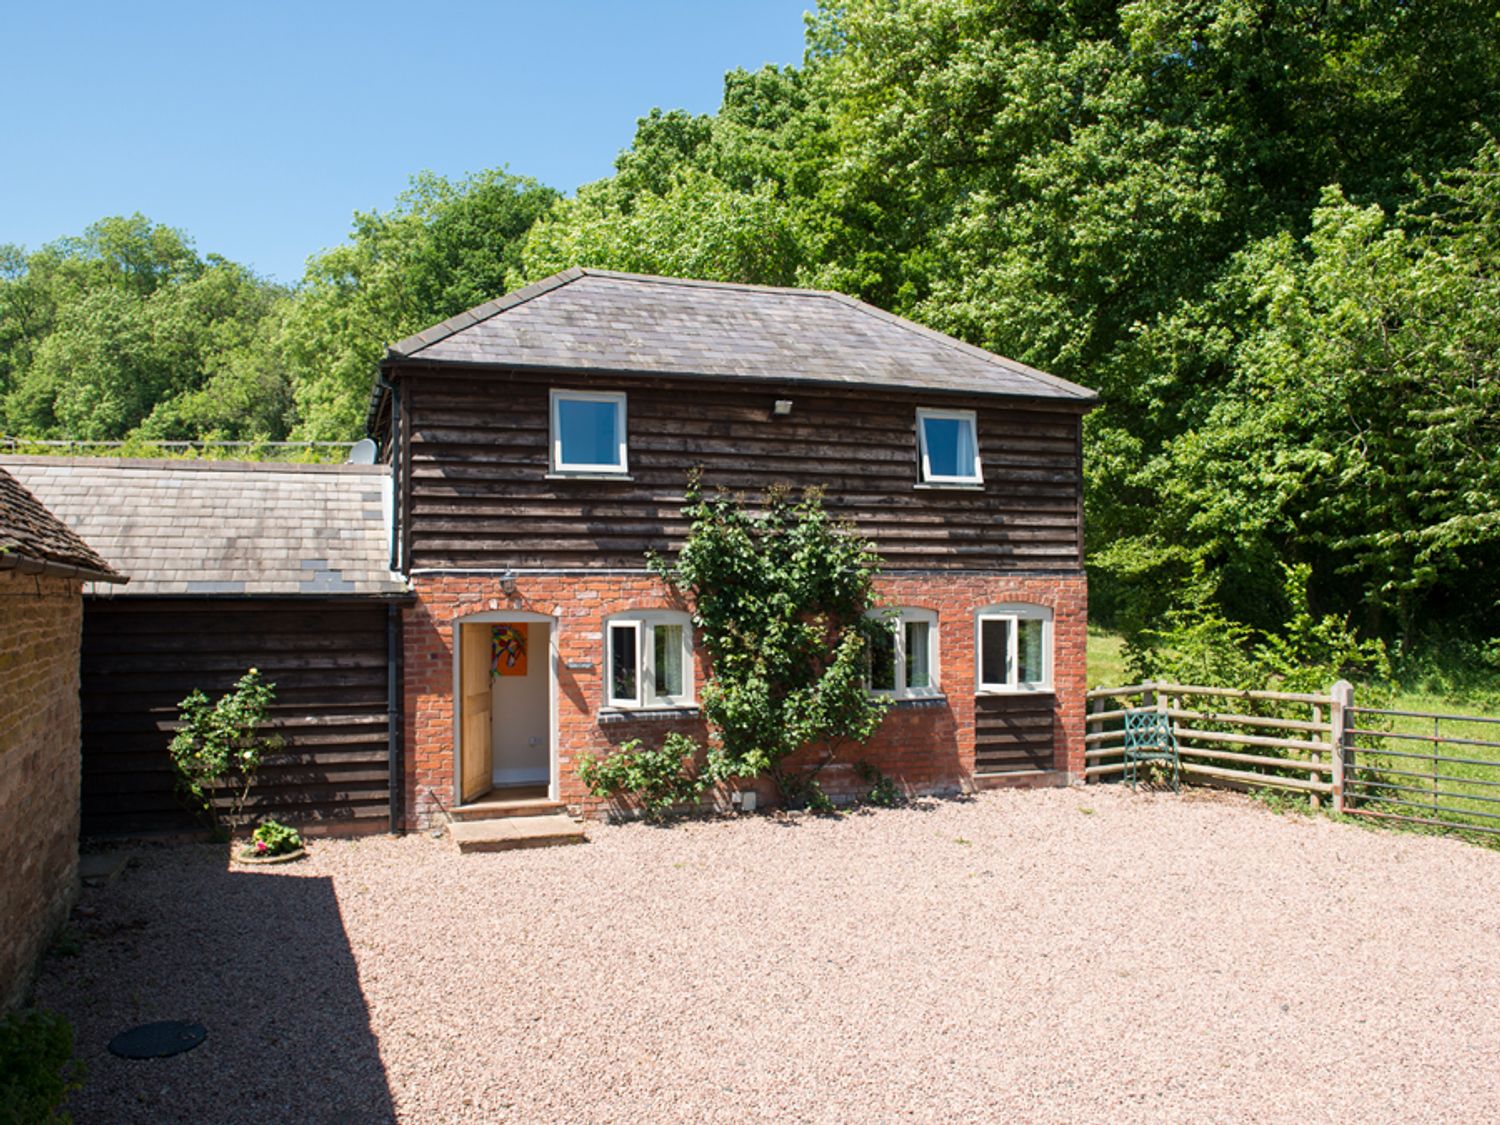 Stable Cottage - Cotswolds - 932219 - photo 1